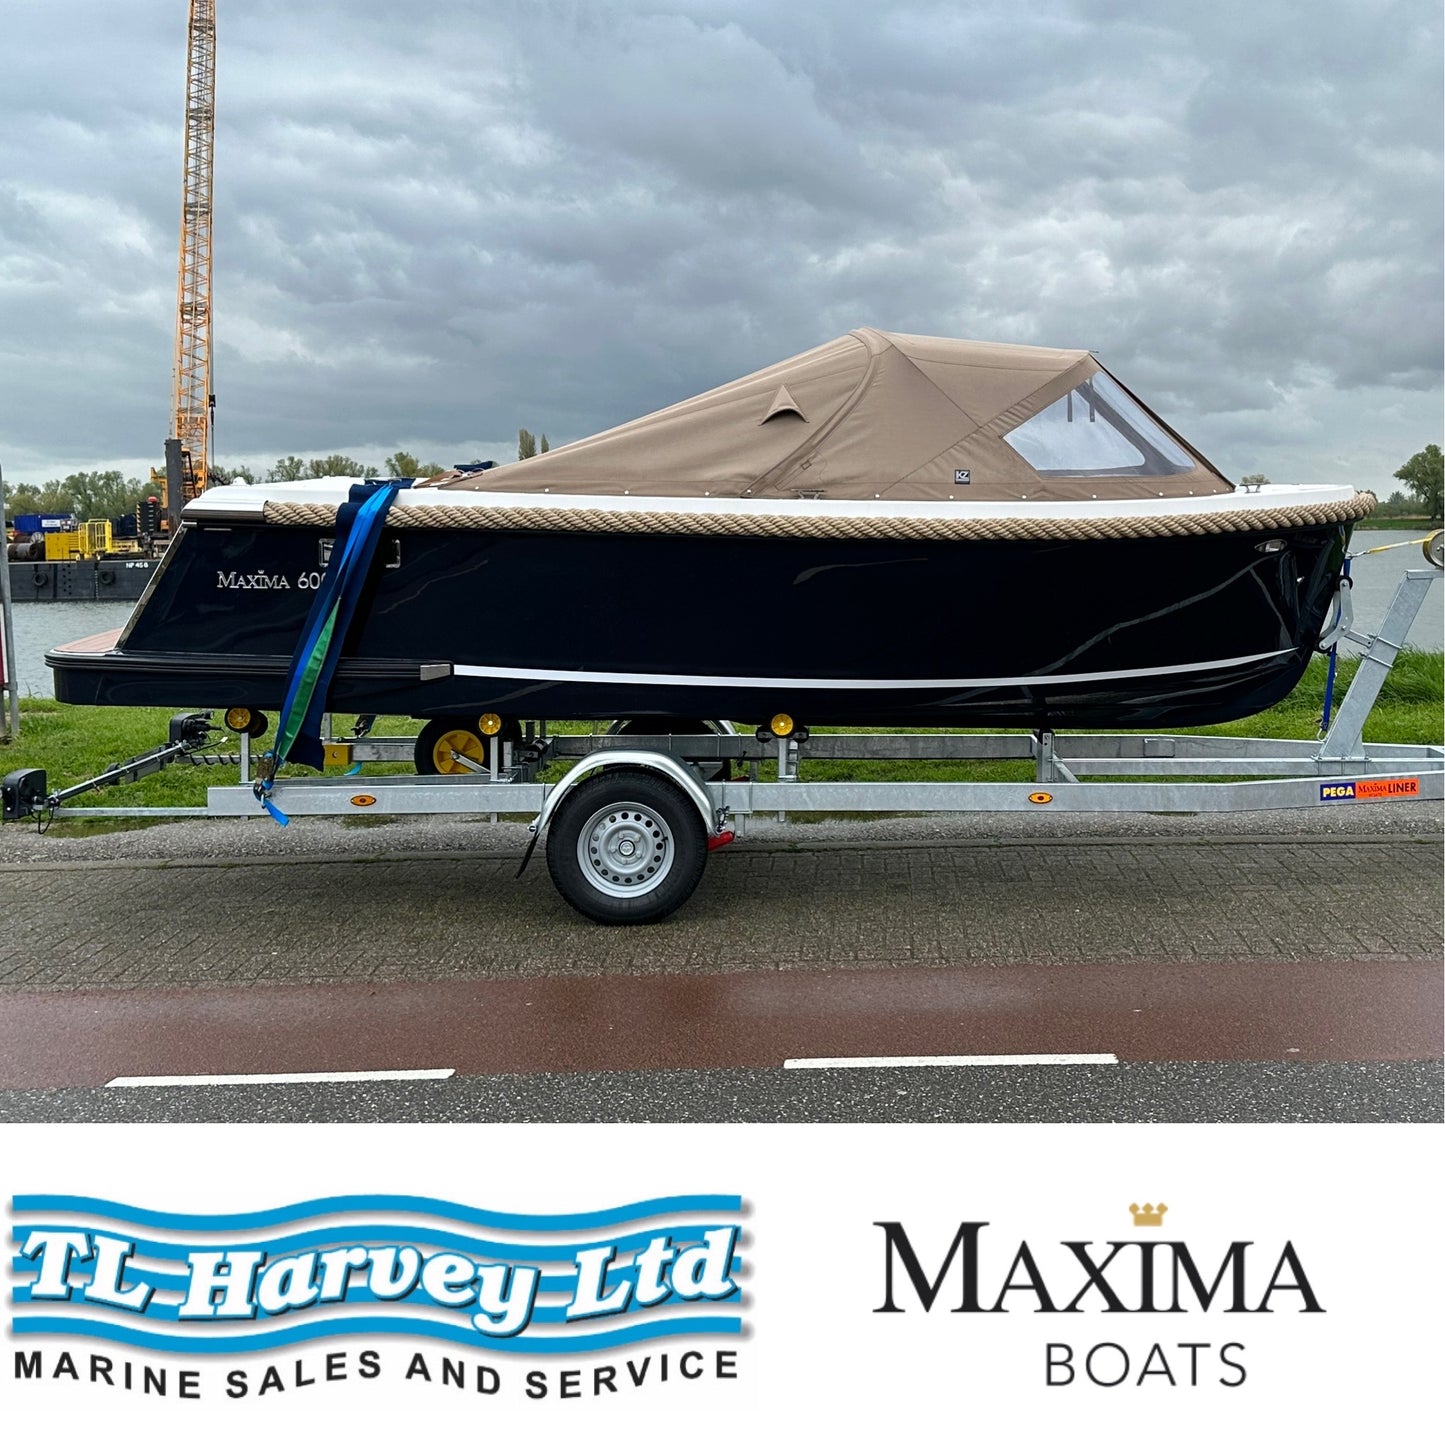 Maxima 600 Boat Powered by Honda BF50 50hp in stock now